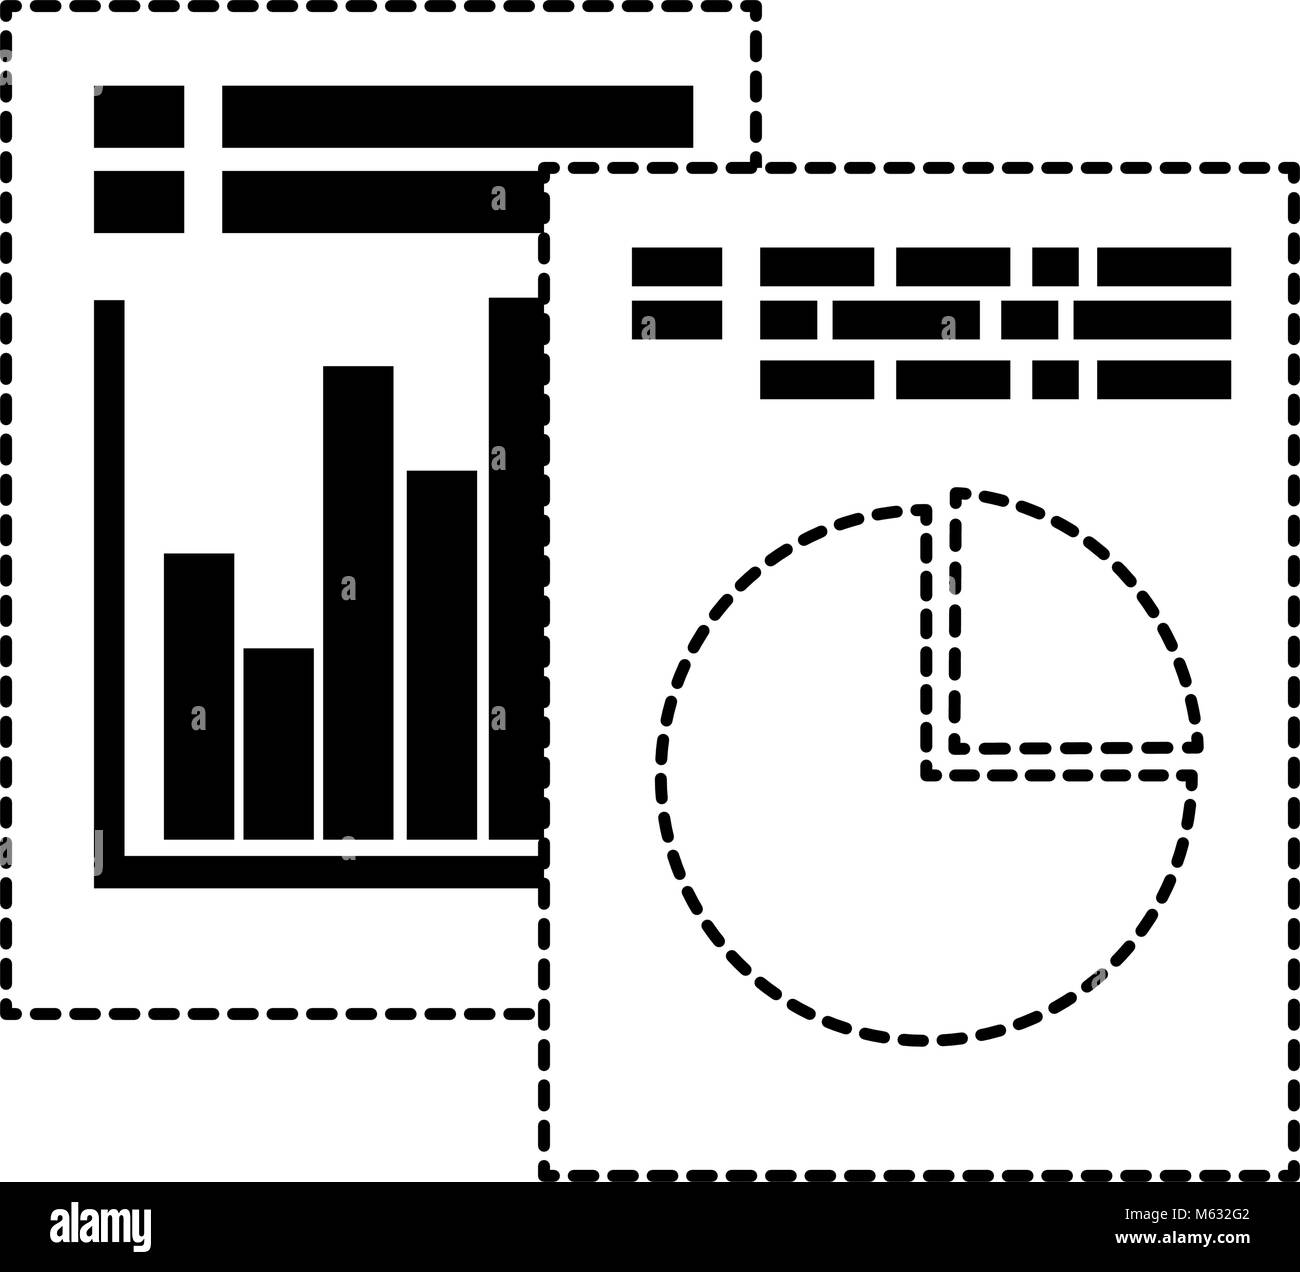 documents with statistics infographic Stock Vector